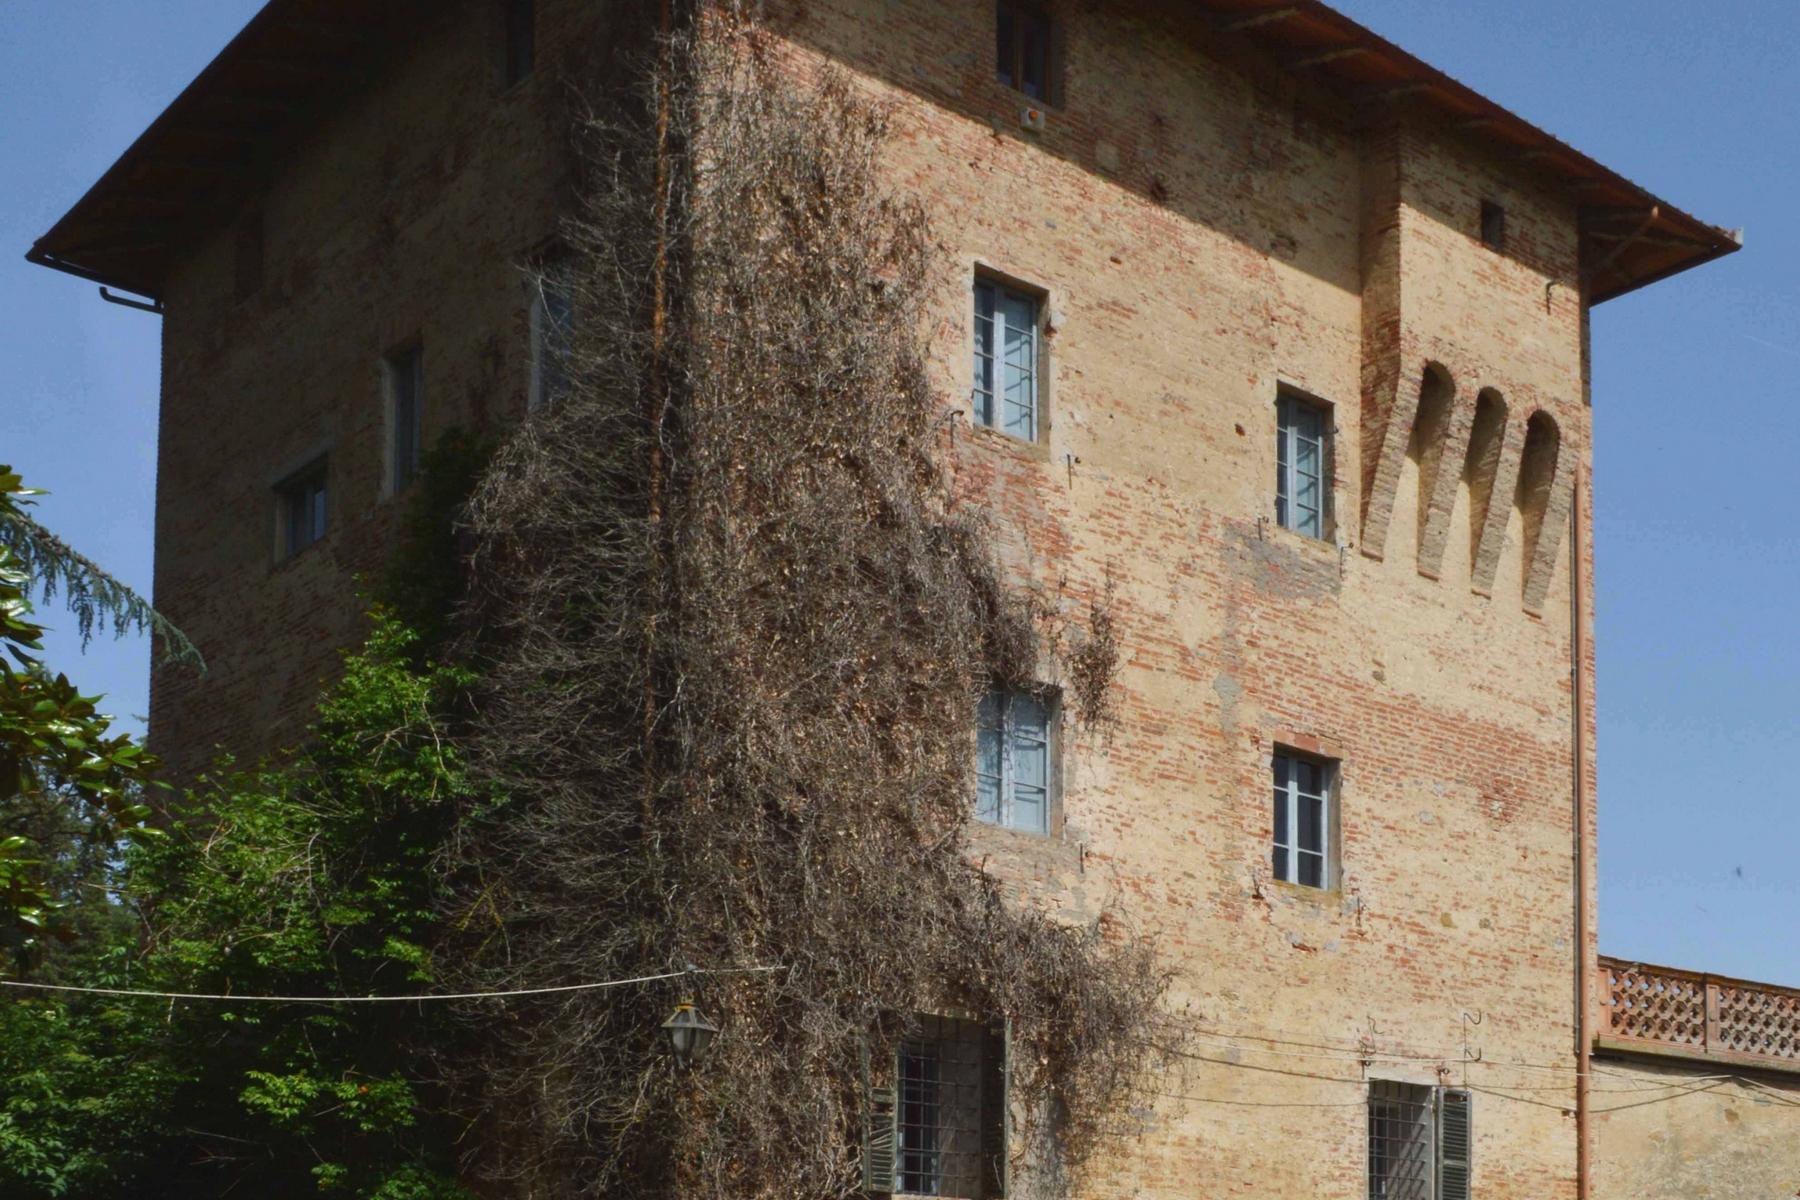 Majestic 15th century mill to be restored - 7